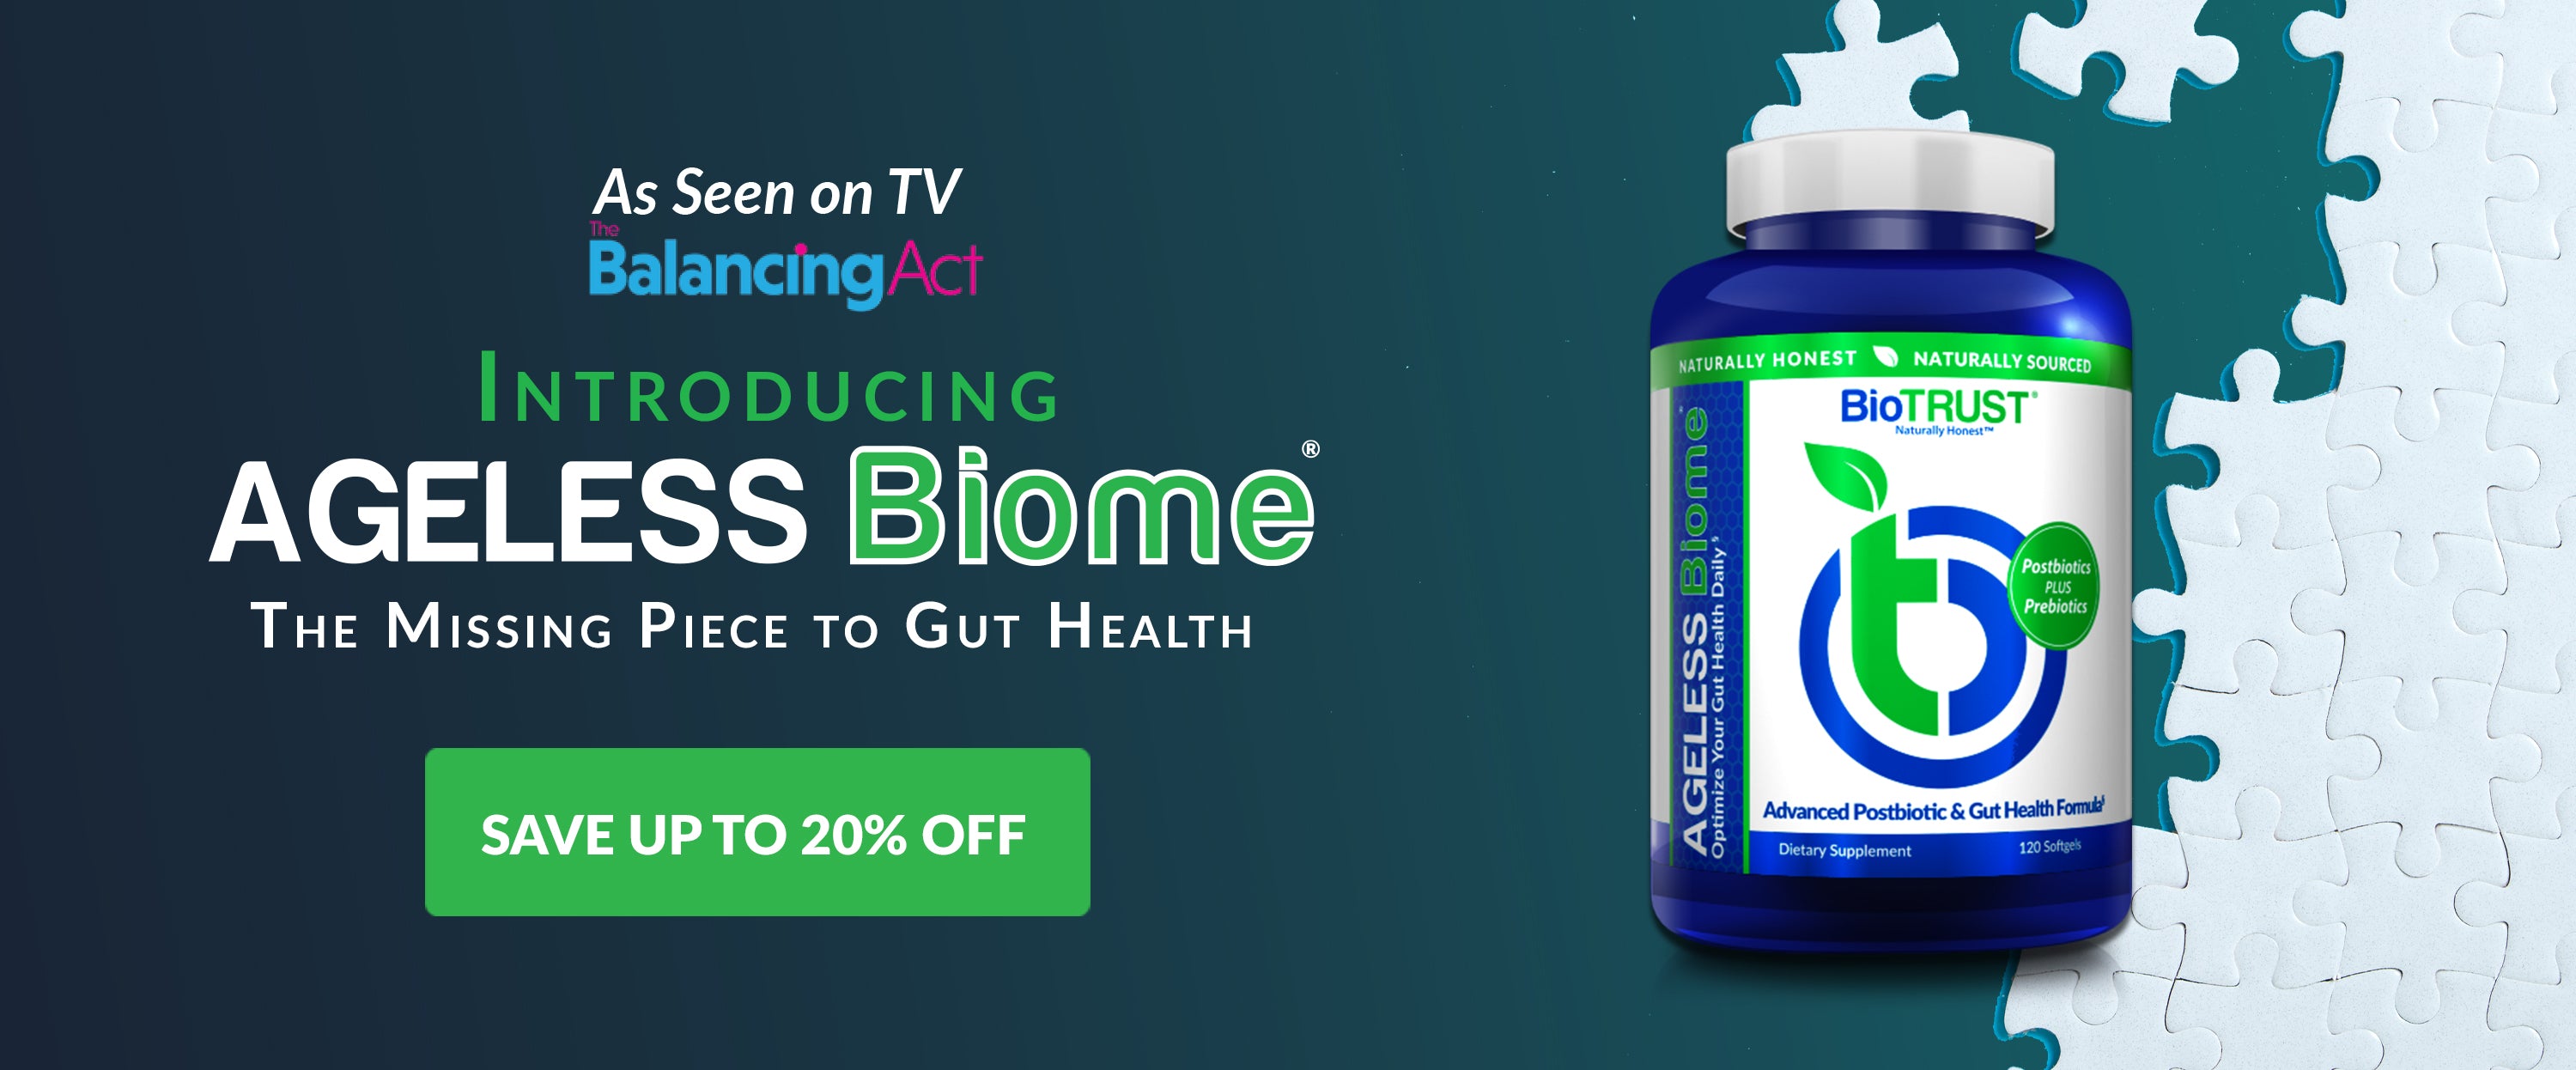 Up to 20% Off BioTRUST Ageless Biome